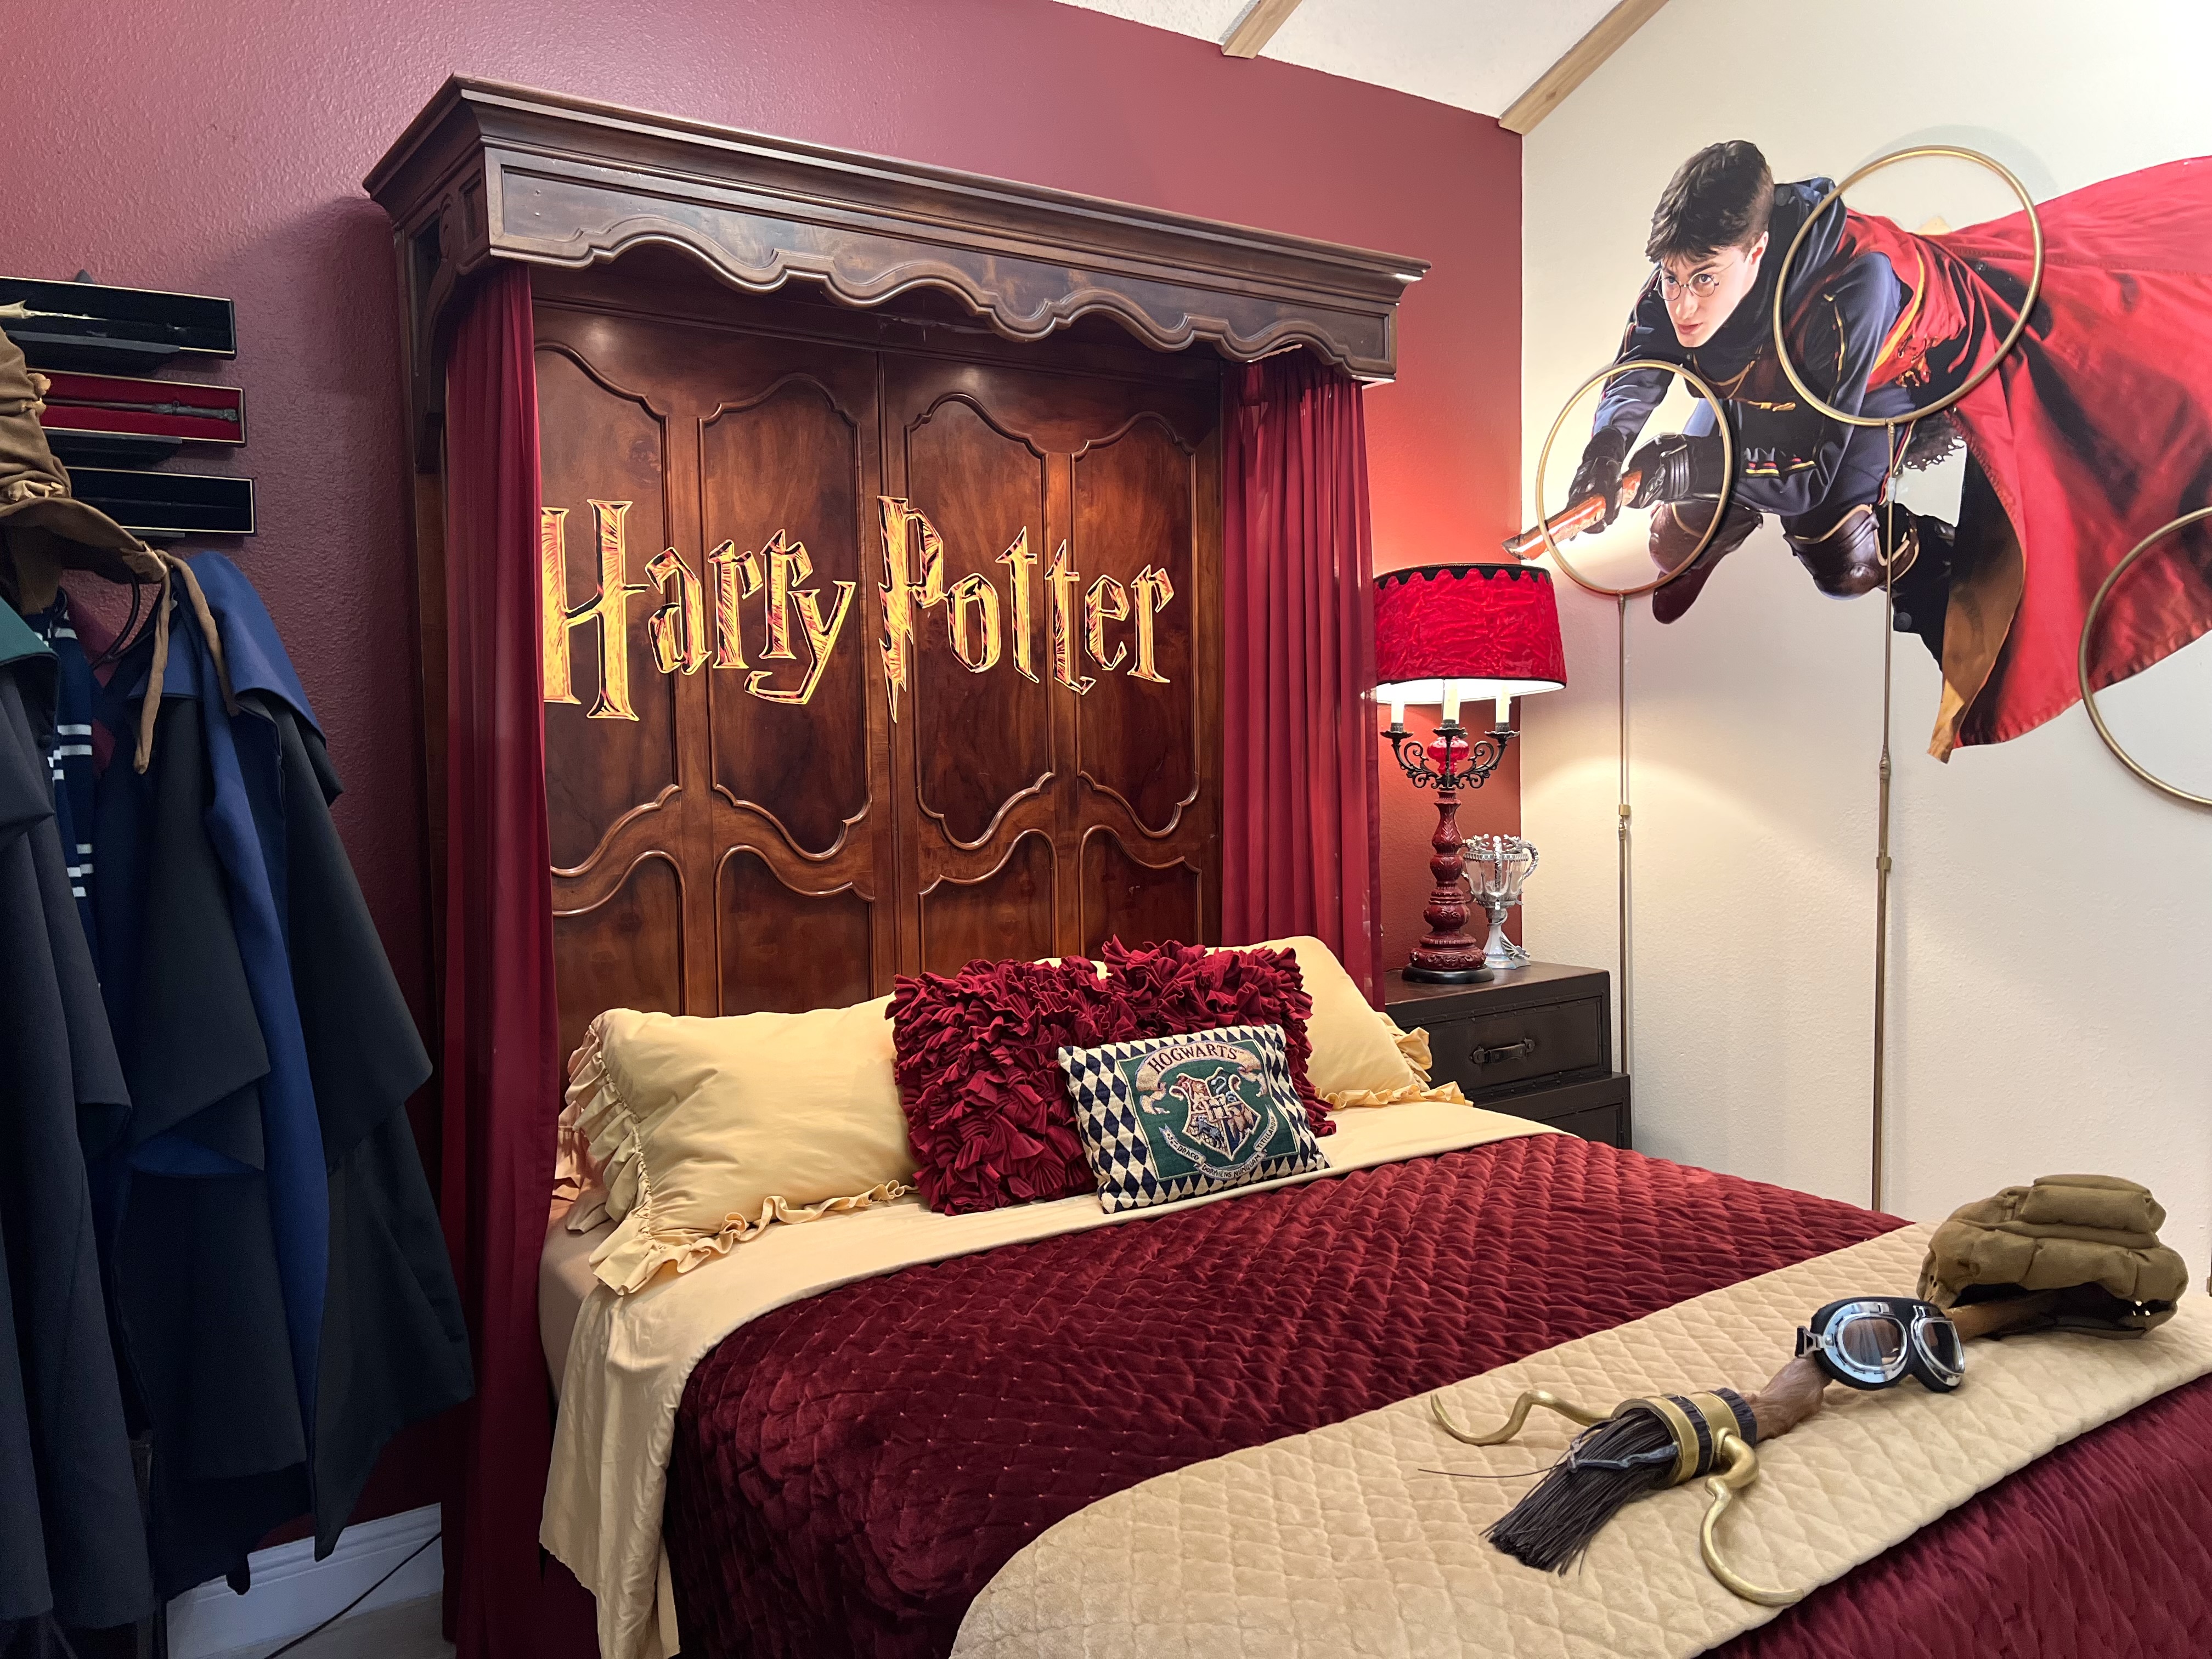 HARRY POTTER's queen bedroom includes all magical wands and school robes for wizards from all FOUR of Hogwart's house teams...